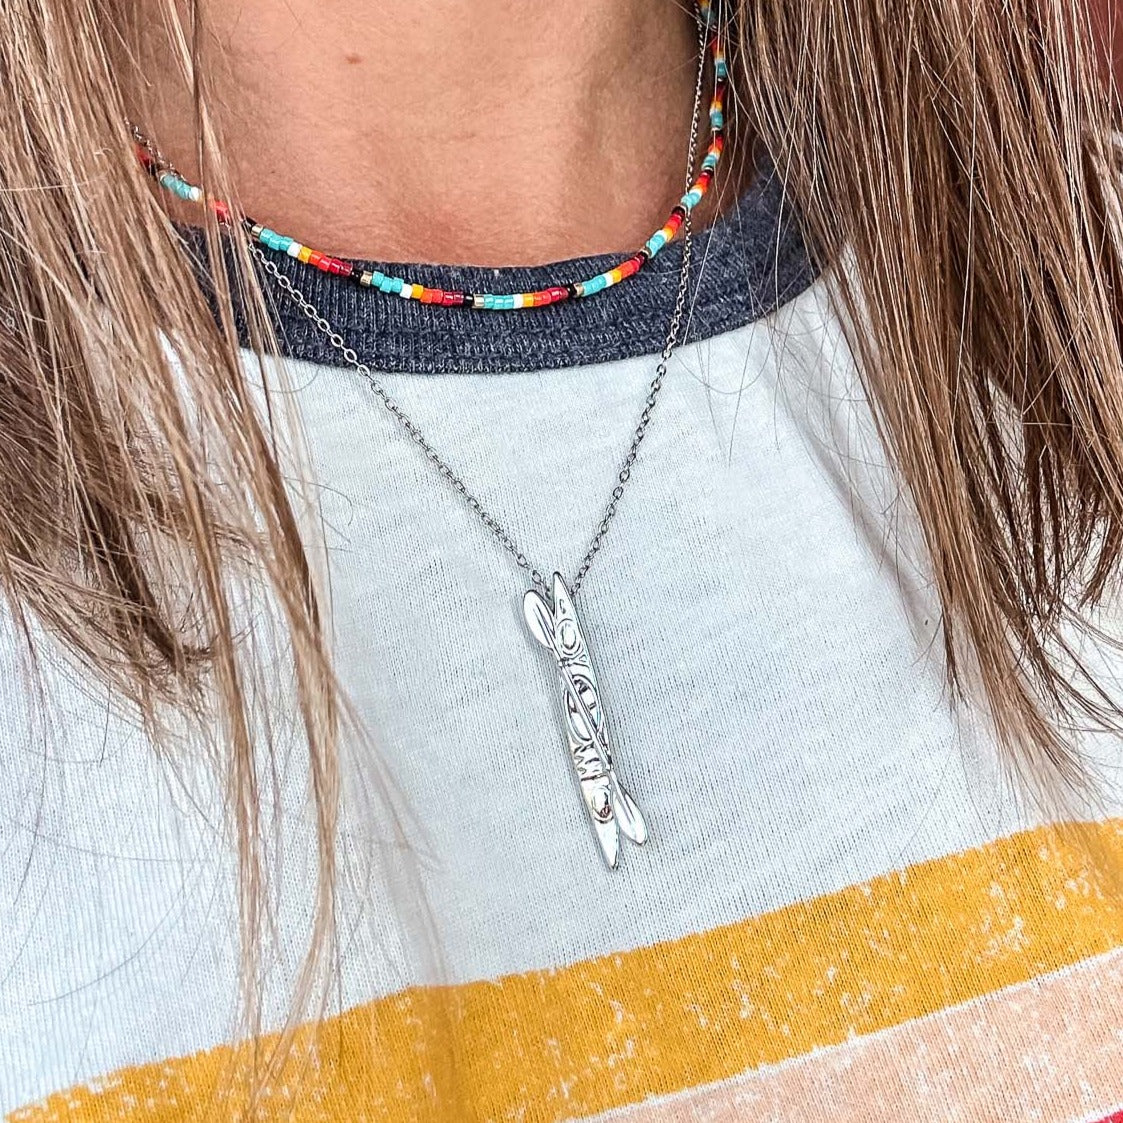 Silver Kayak Pendant Necklace made by Born to Rock Jewelry. Based in San Diego, California. Kayak, kayaking, Beach, Ocean, Sports, Water Sports Accessories, Outdoor Adventure & Surf Shop.